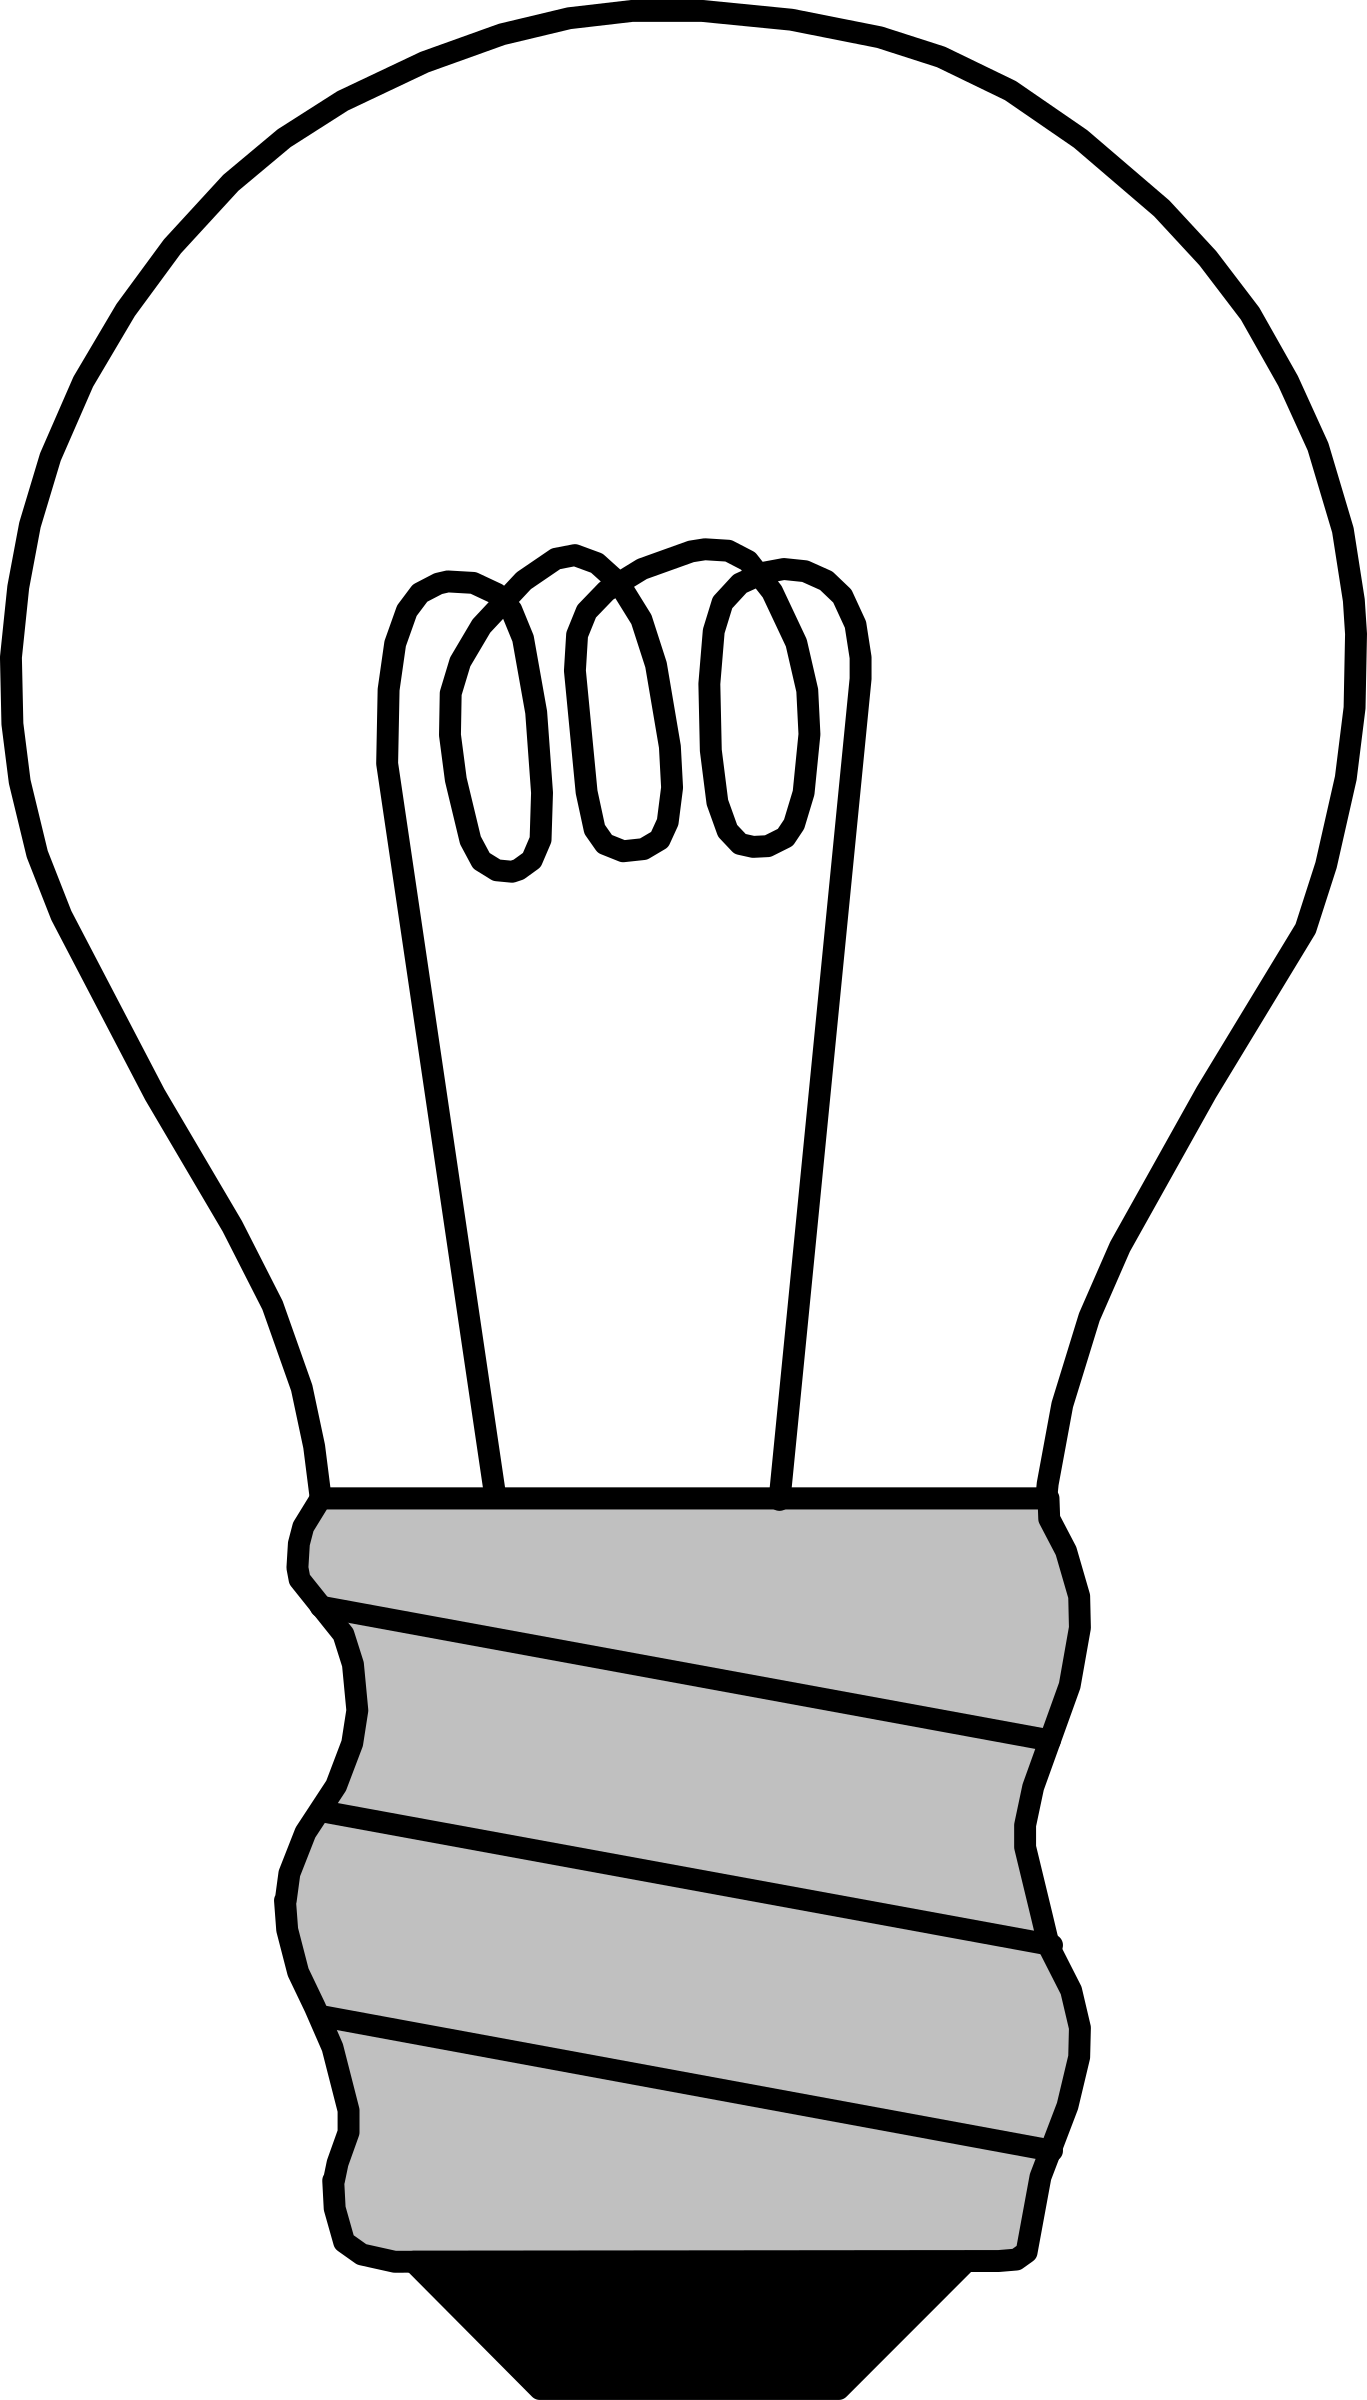 drawings-light-bulb-objects-printable-coloring-pages